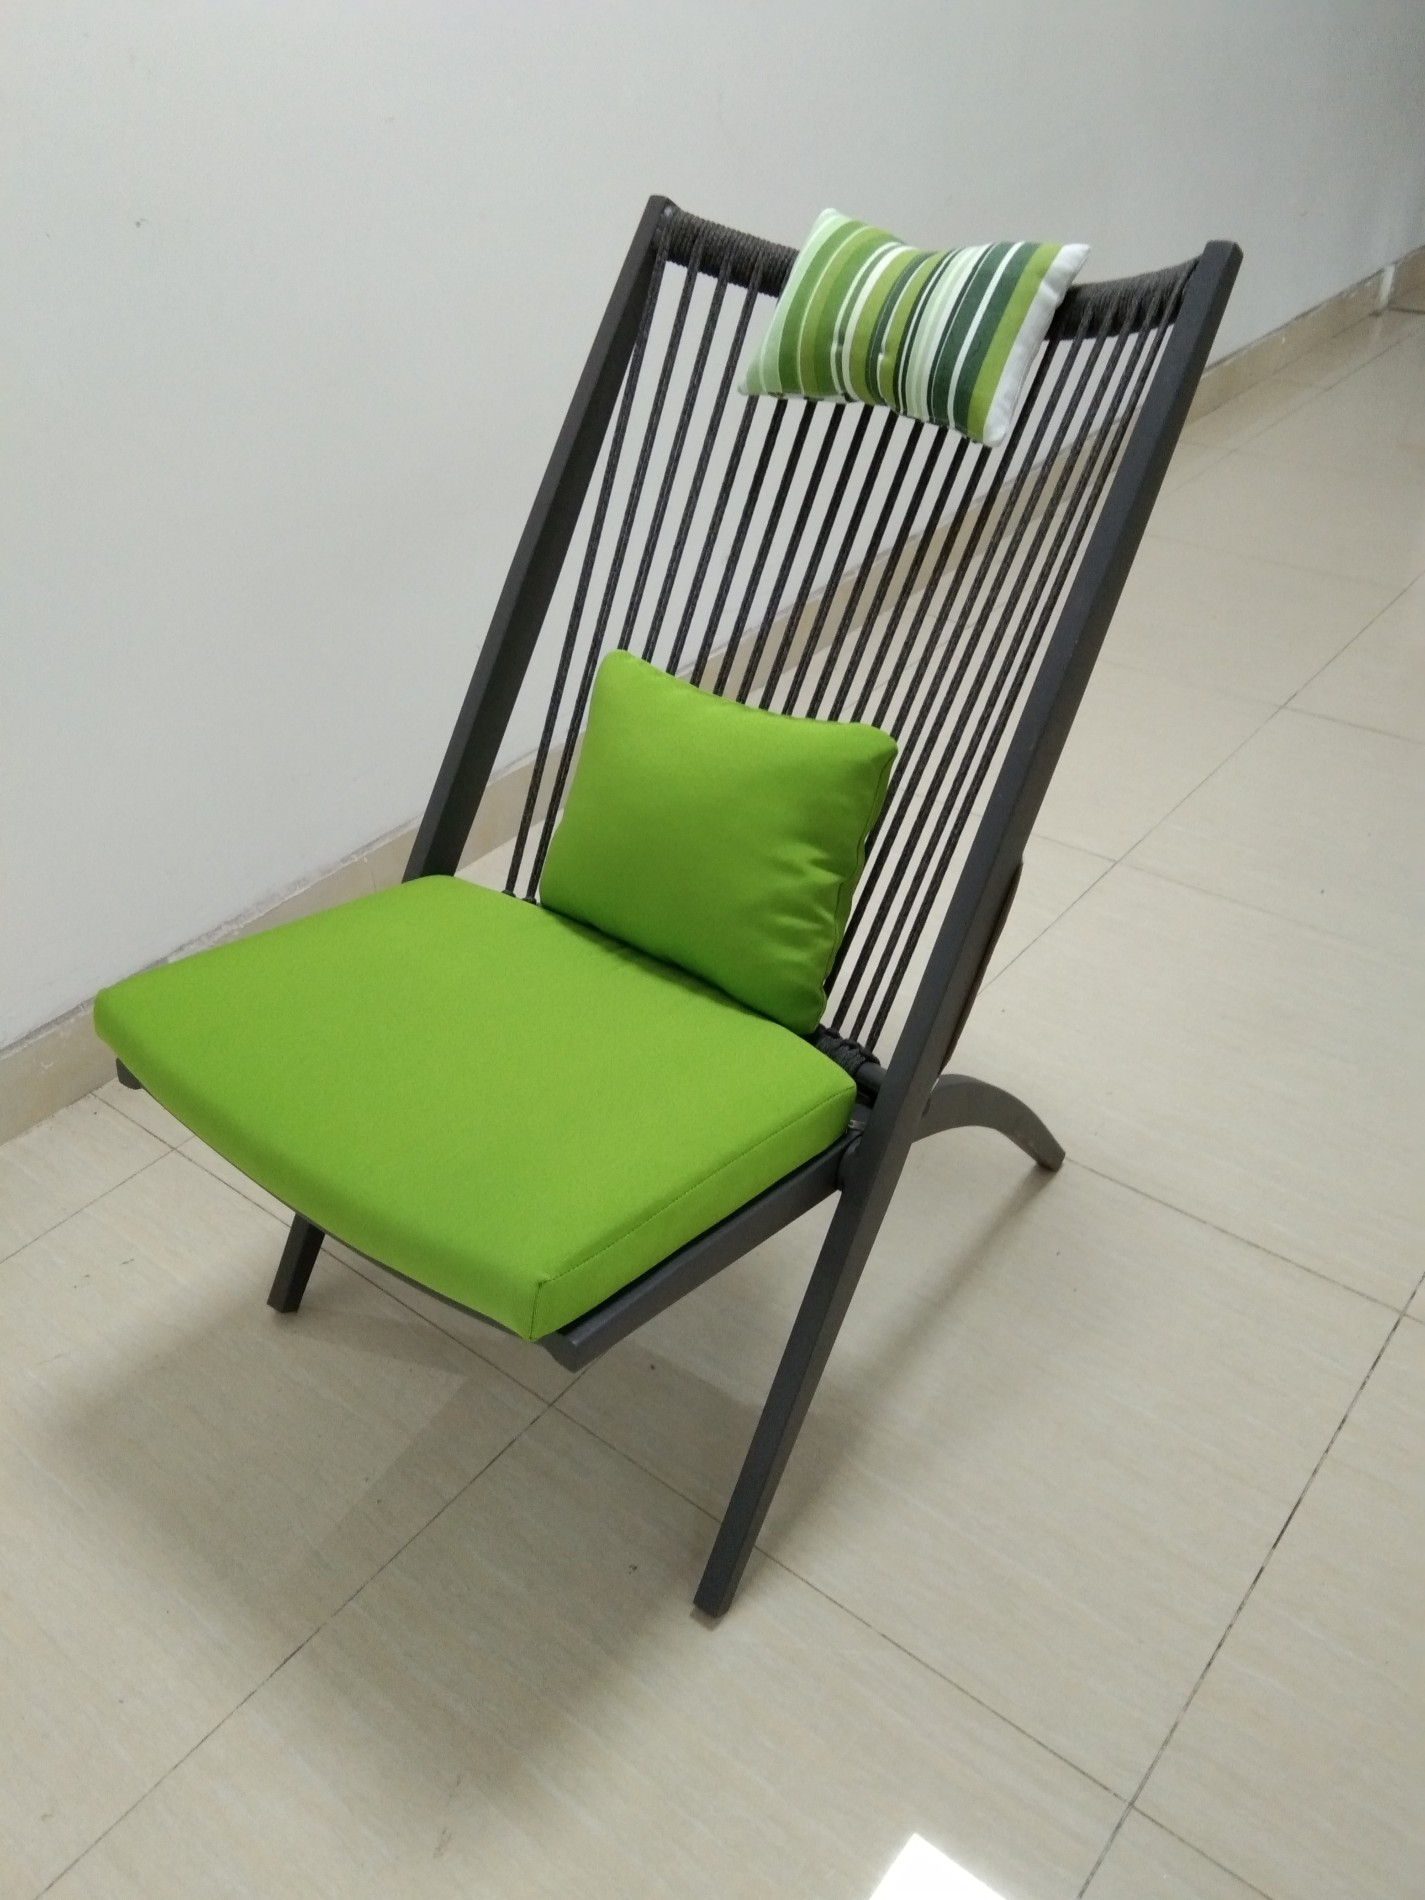 aluminum folding chairs outdoor chair